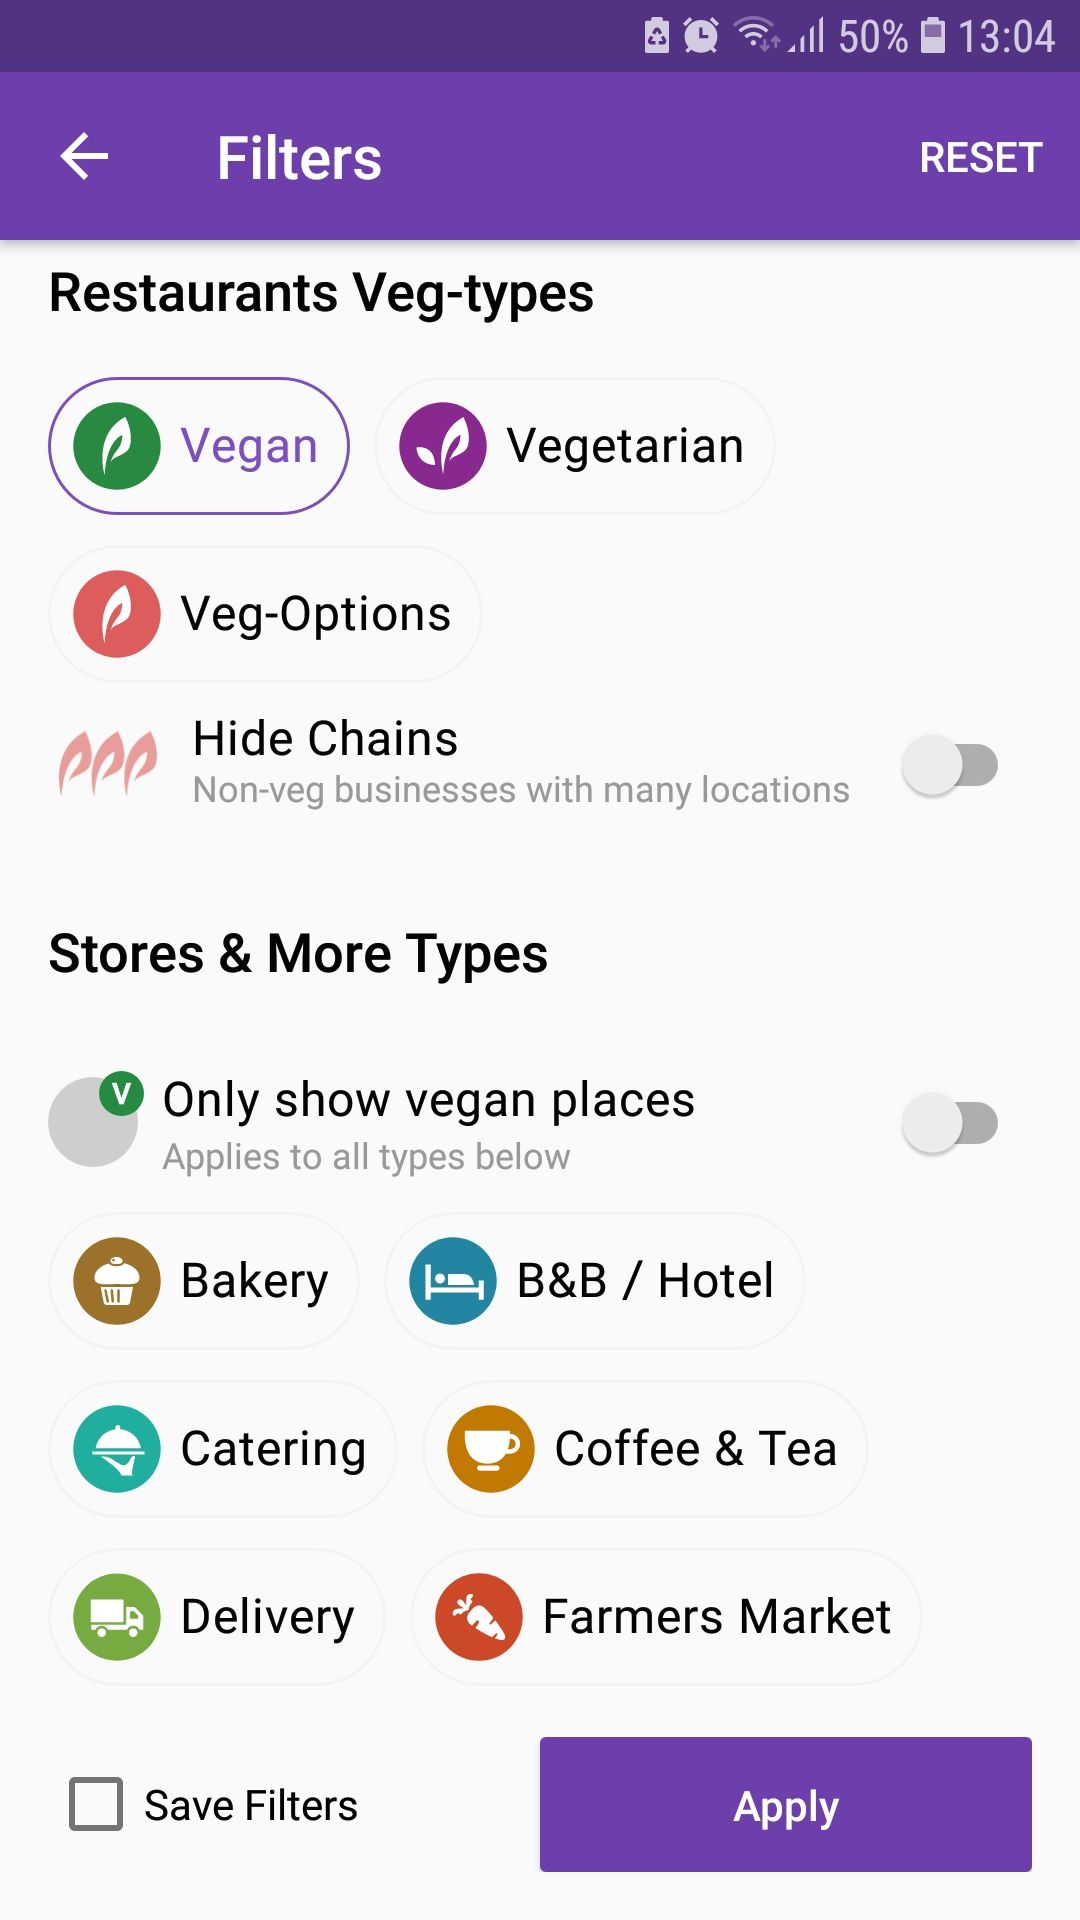 HappyCow mobile food app filters